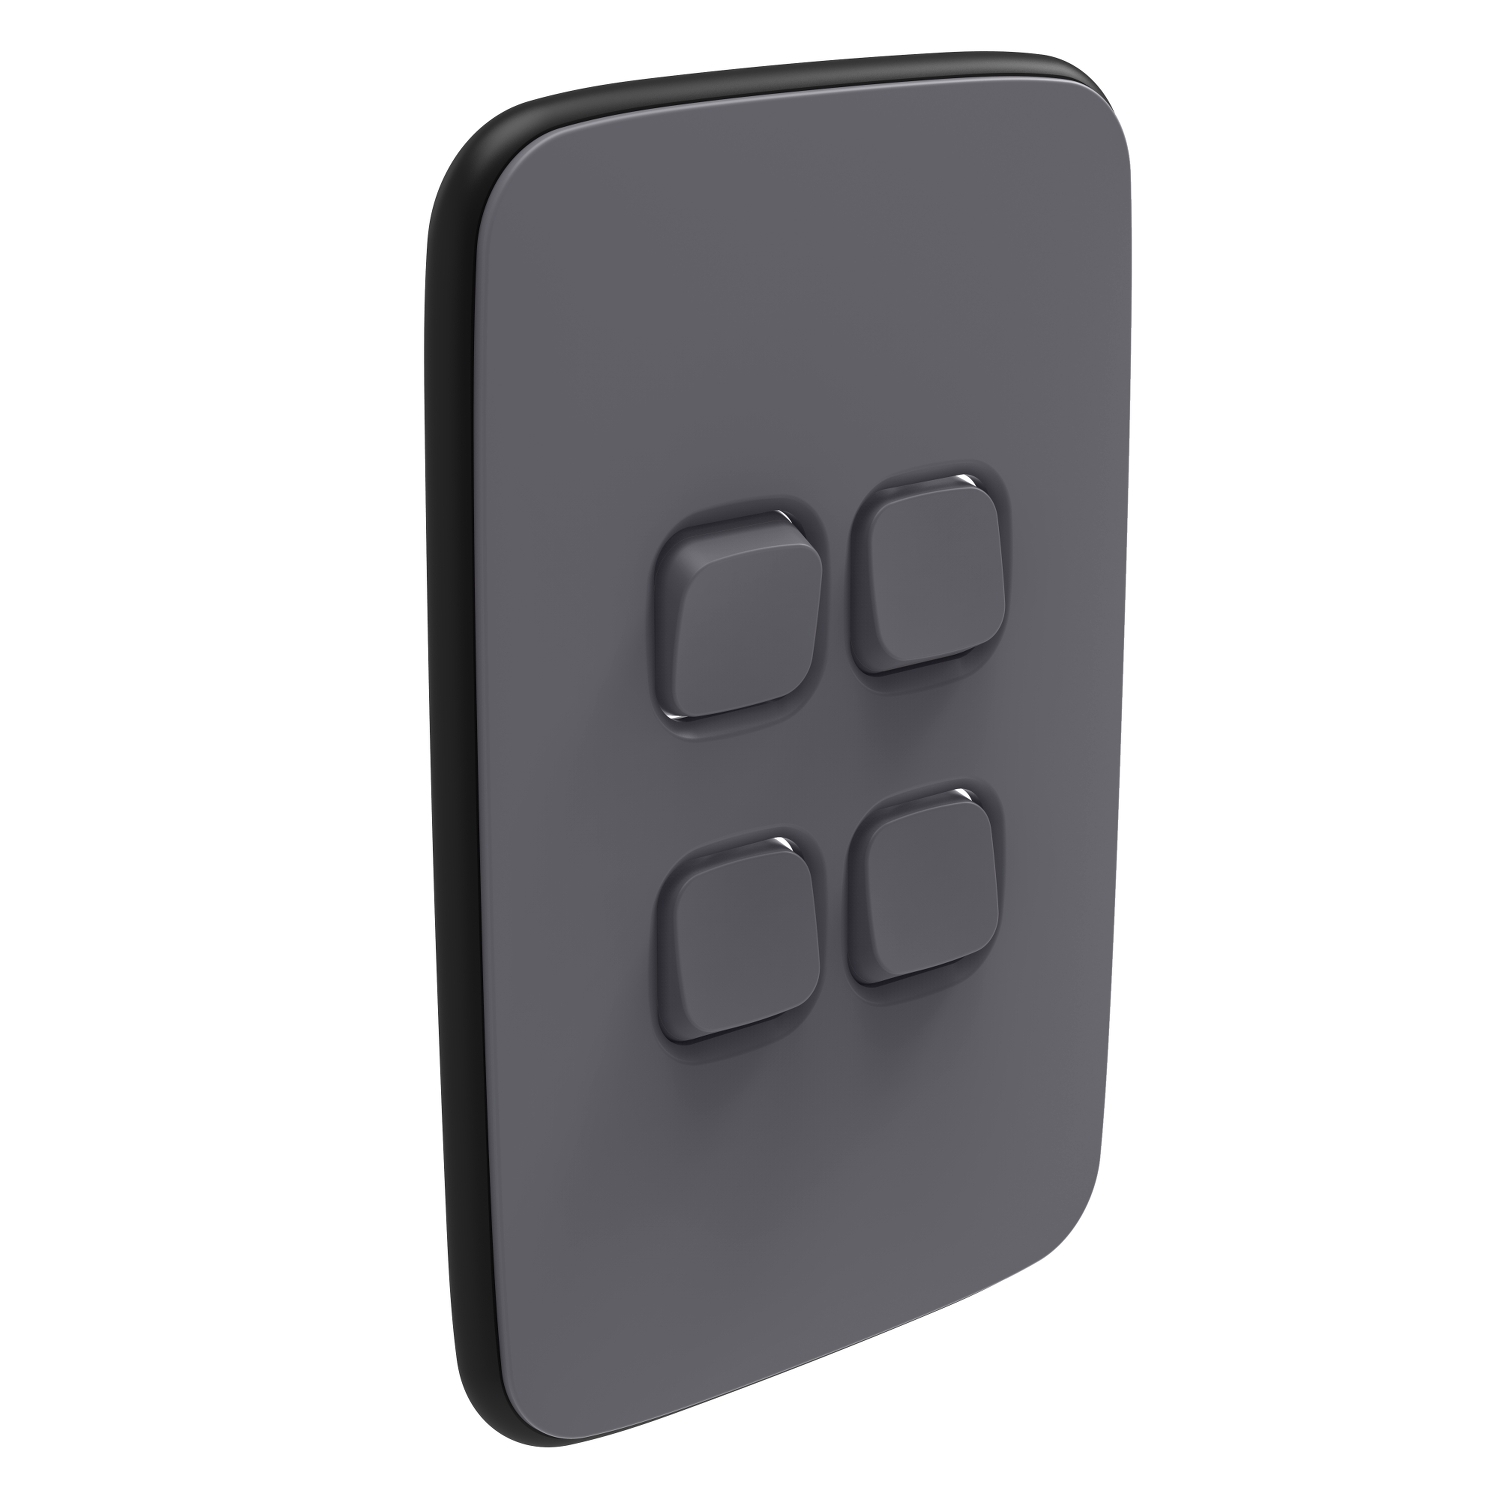 PDL Iconic Essence, cover frame, 4 switches, vertical - Ash Grey